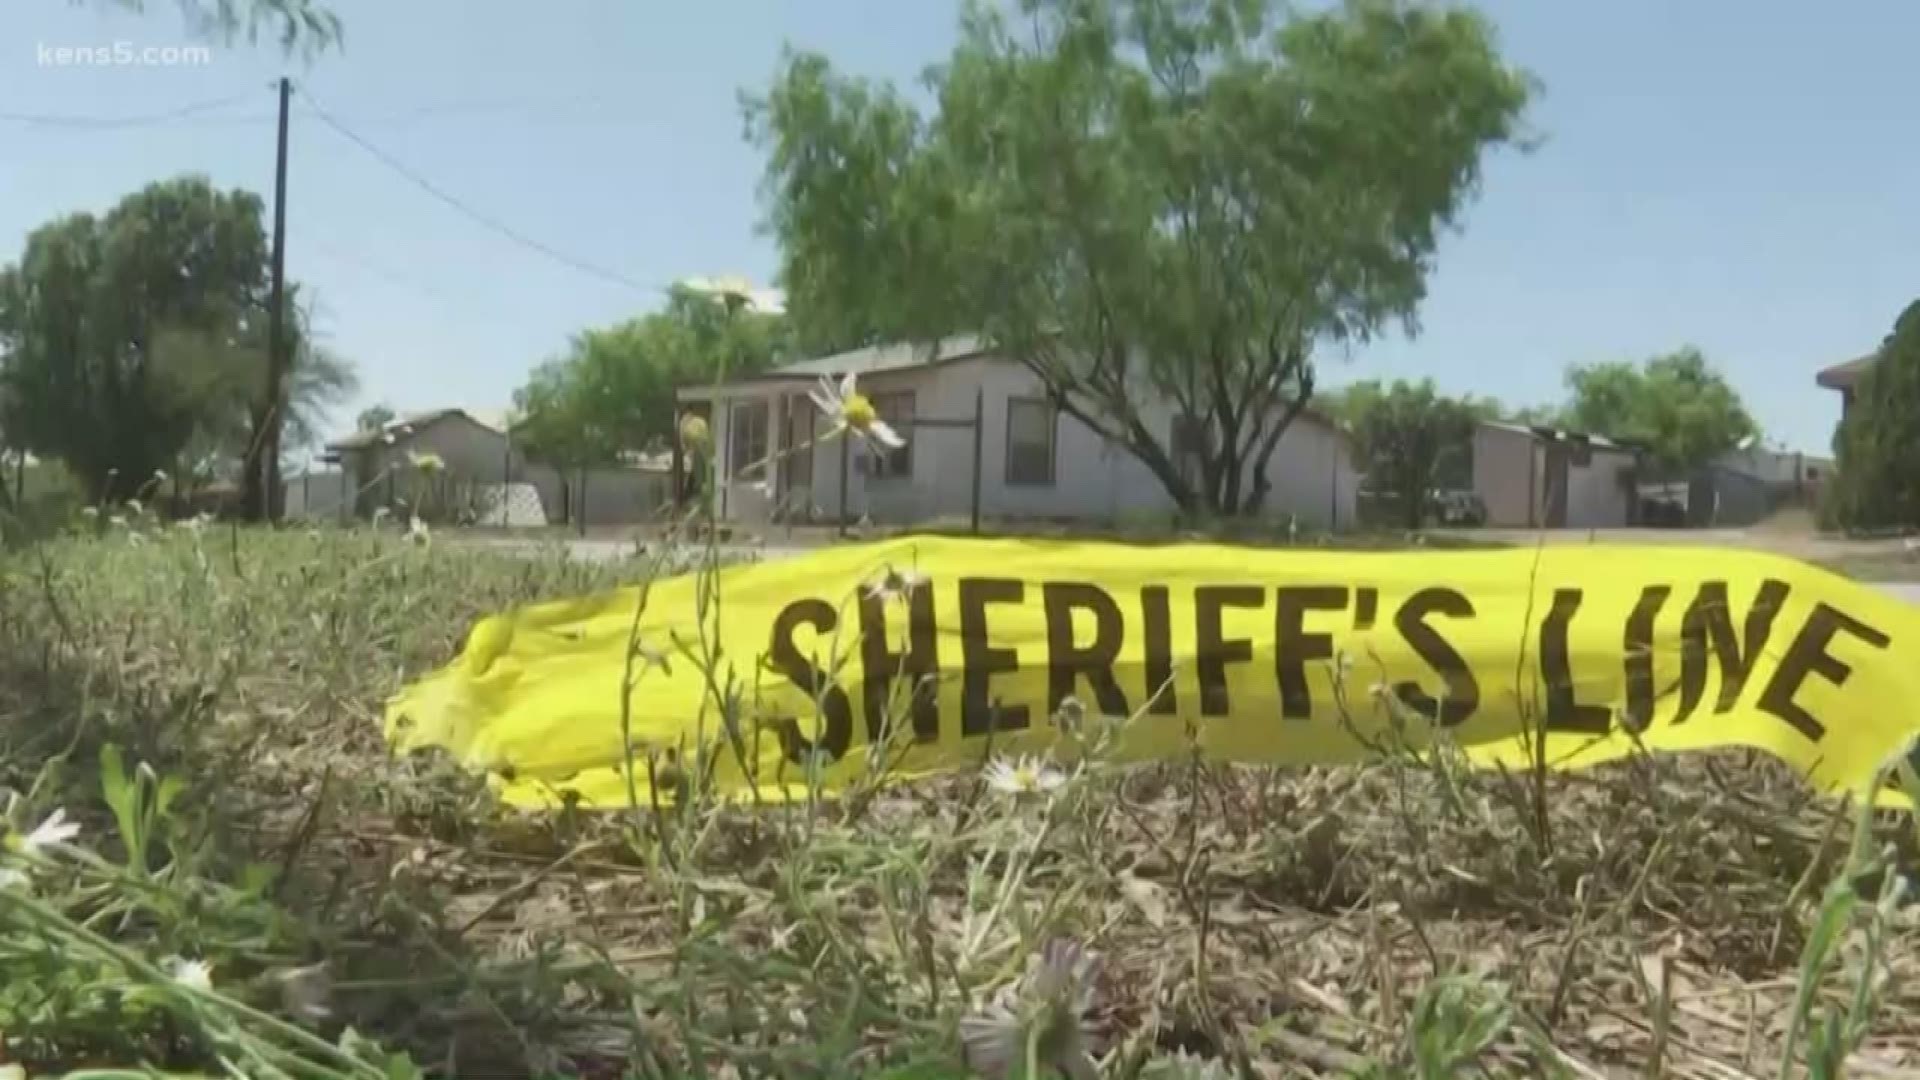 A 50-year-old school district employee in Carrizo Springs is dead and an 18-year-old man is in custody in connection with the fatal stabbing. Texas Ranger Jose Balderas said Carlos Pena was found dead in his home in Asherton shortly before 11 p.m. Tuesday night.